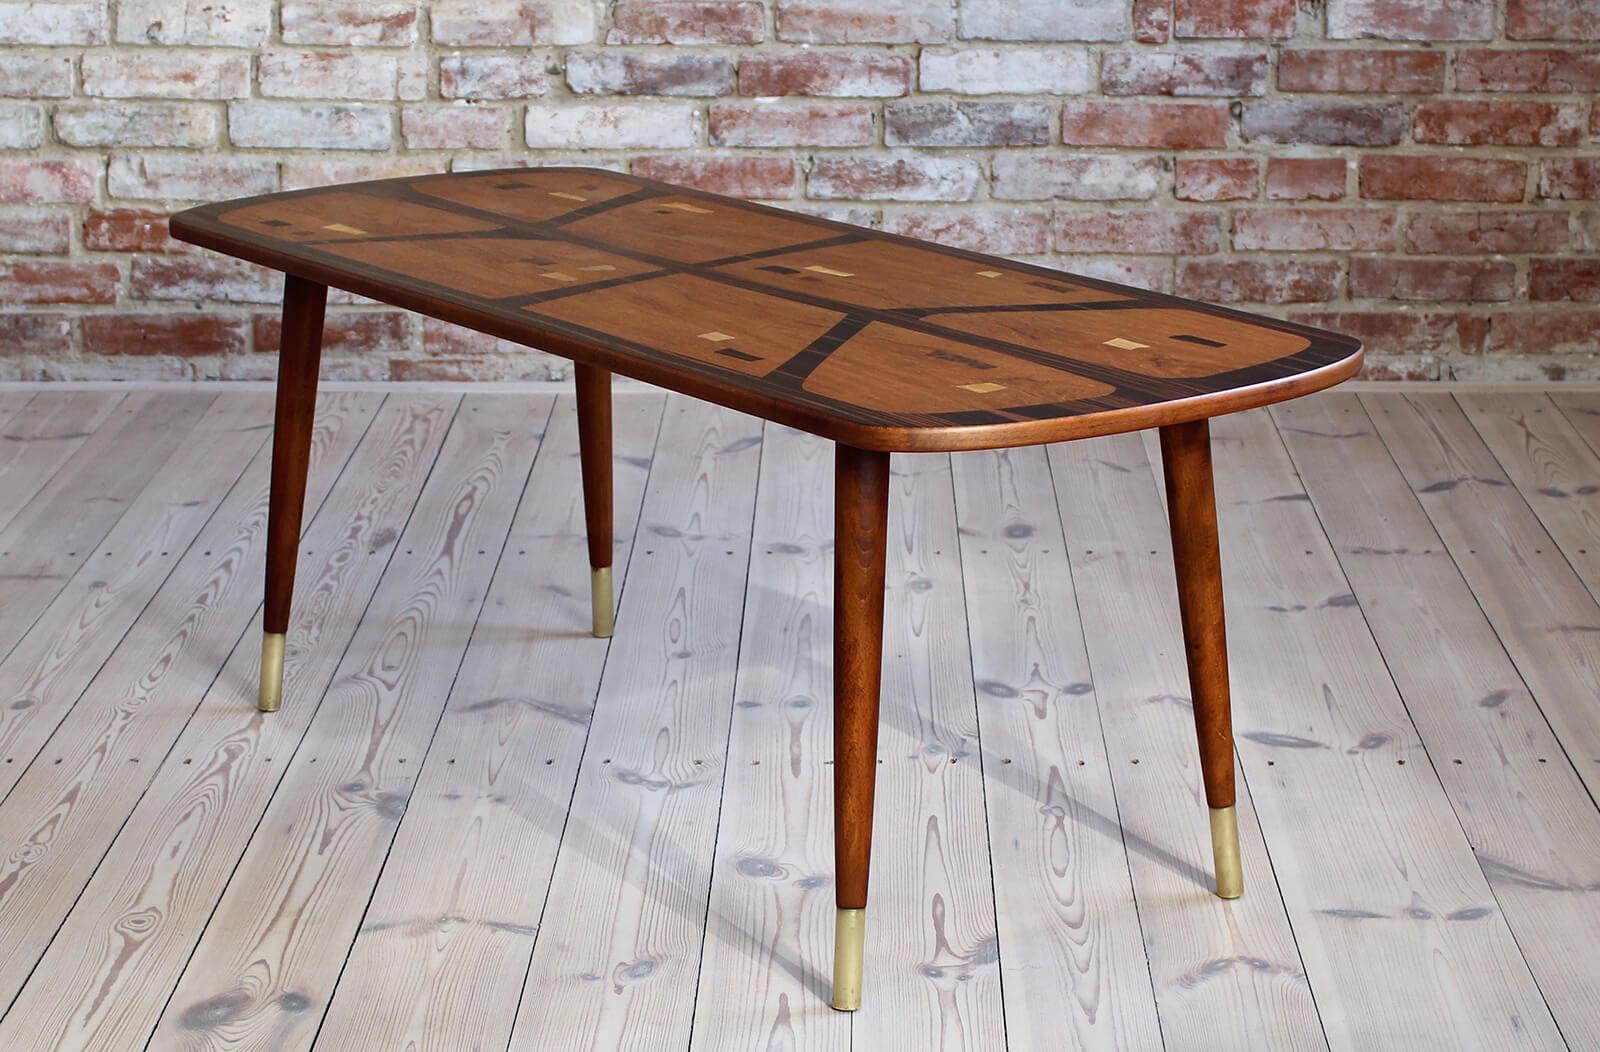 This beautiful coffee table was most probably made circa 1960s. It features 4 slender legs, all finished with brass, which was a very characteristic element of furniture in those years. The magnificent table top is veneered with different wood